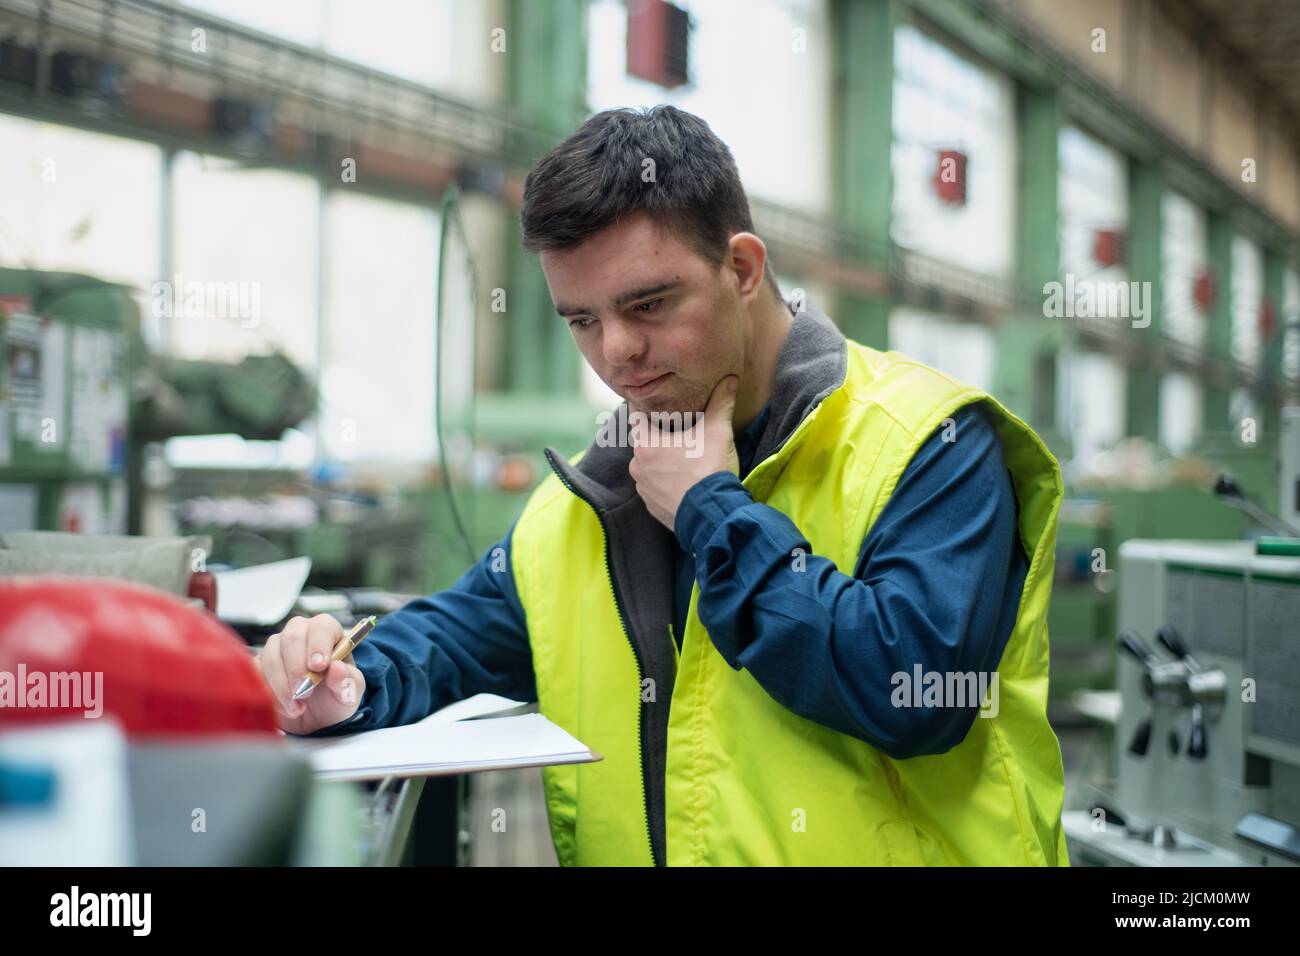 Young man with Down syndrome working in industrial factory, social integration concept. Stock Photo